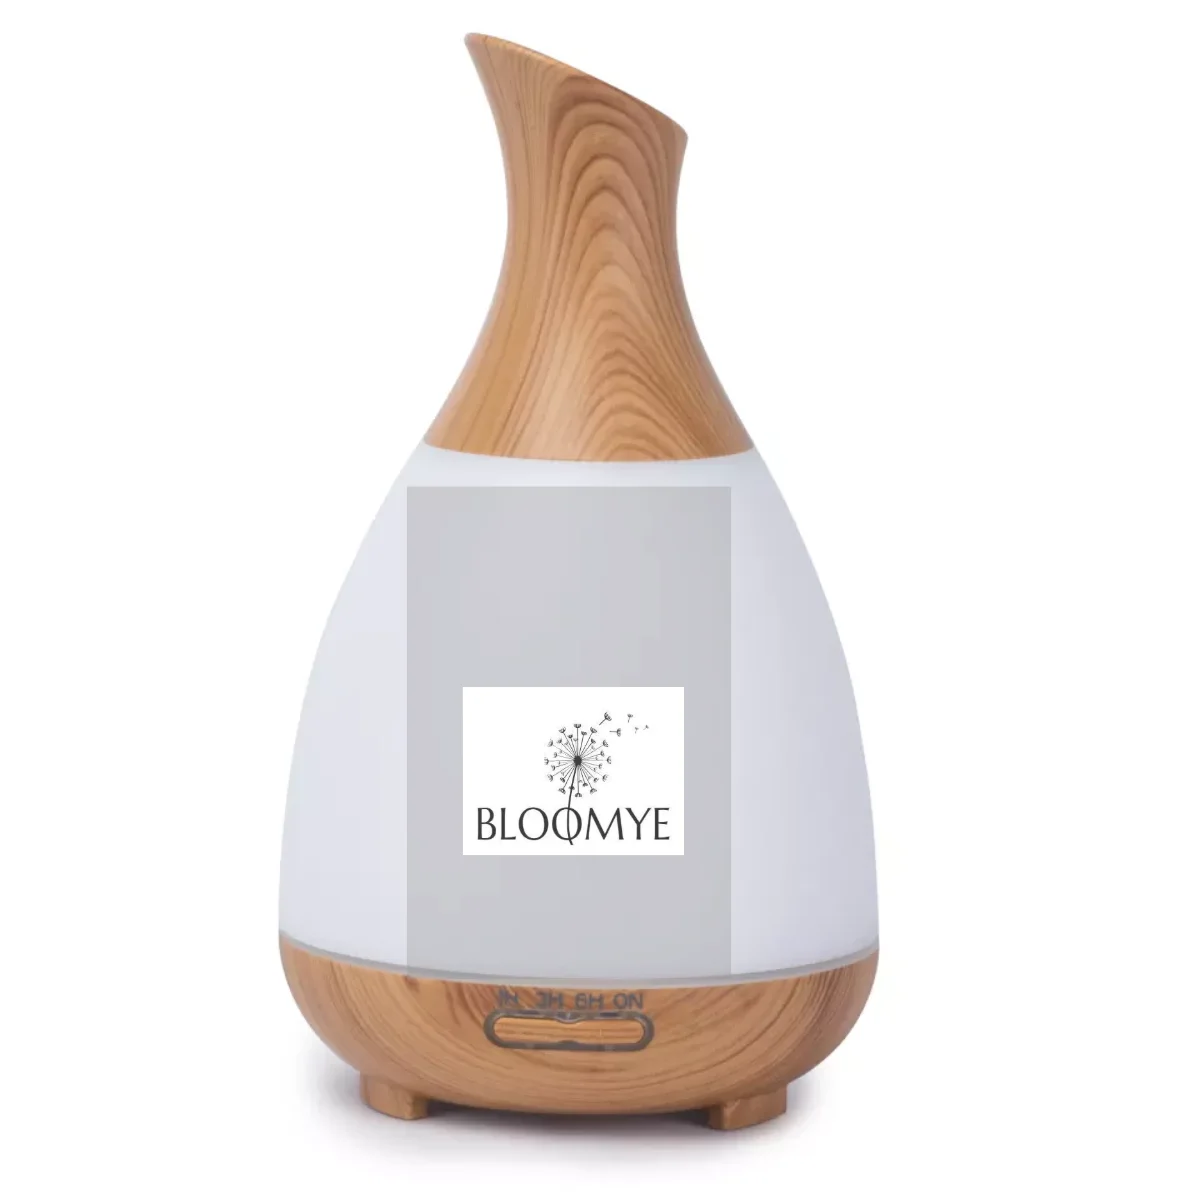 Outlook Digitaal Bezwaar New Flower Vase Electric Air Freshener Danq Humidifier Price  Luchtbevochtiger Essential Oil Aroma Diffuser Ultrasonic Humidifier - Buy  Essential Oil Aroma Diffuser,Humidifier Price,Ultrasonic Humidifier Product  on Alibaba.com